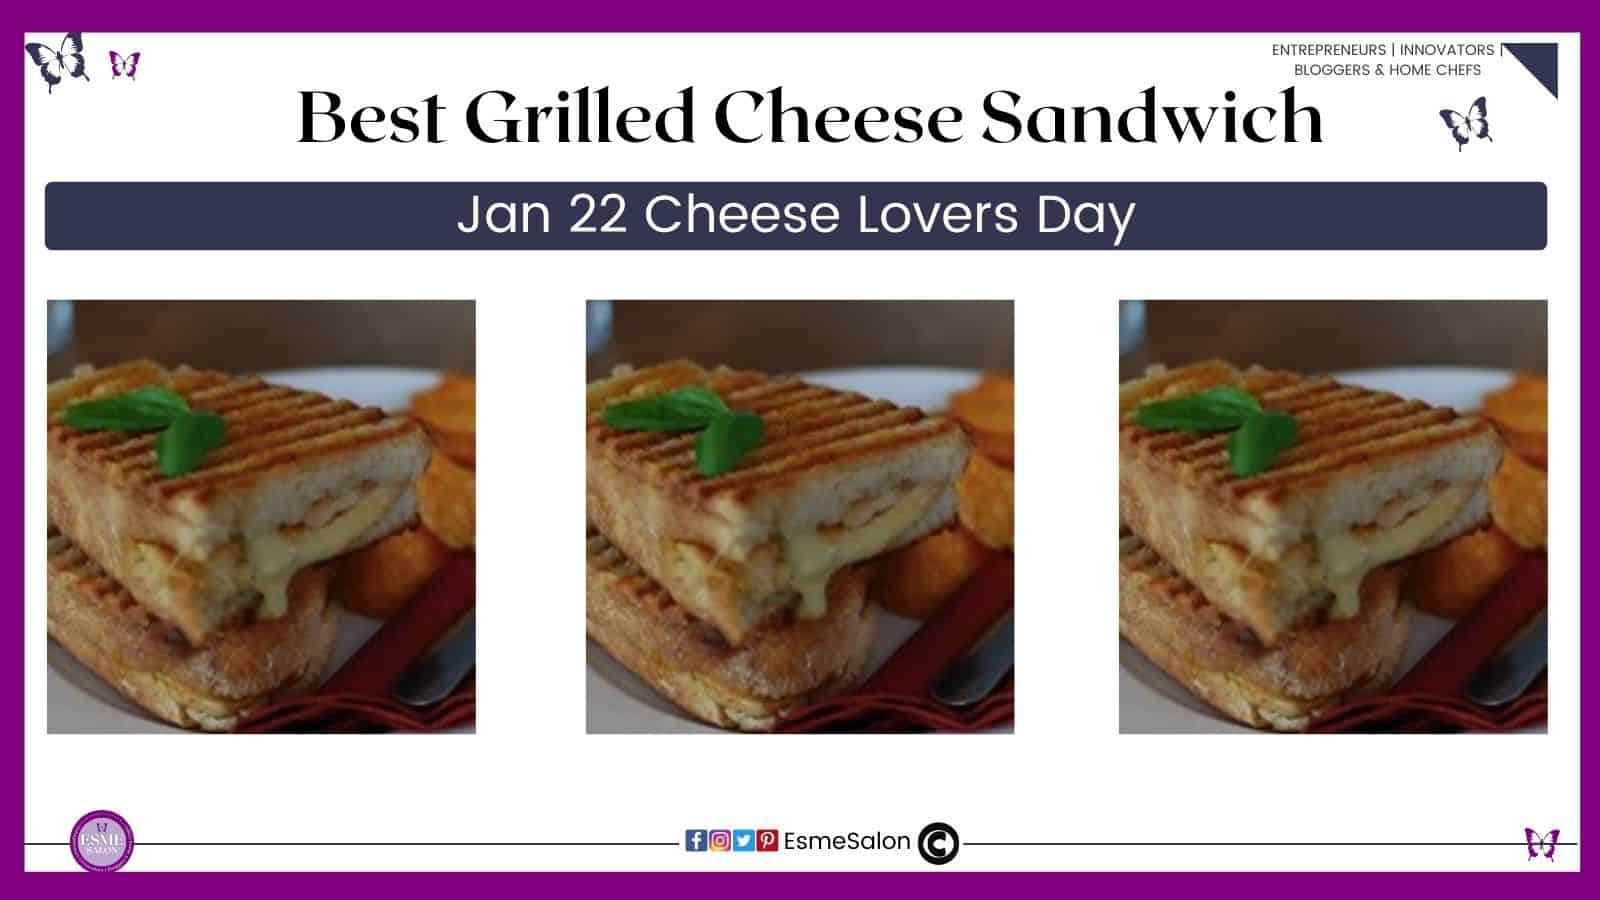 an image of two grilled cheese sandwiches stacked with cheese oozing out the center